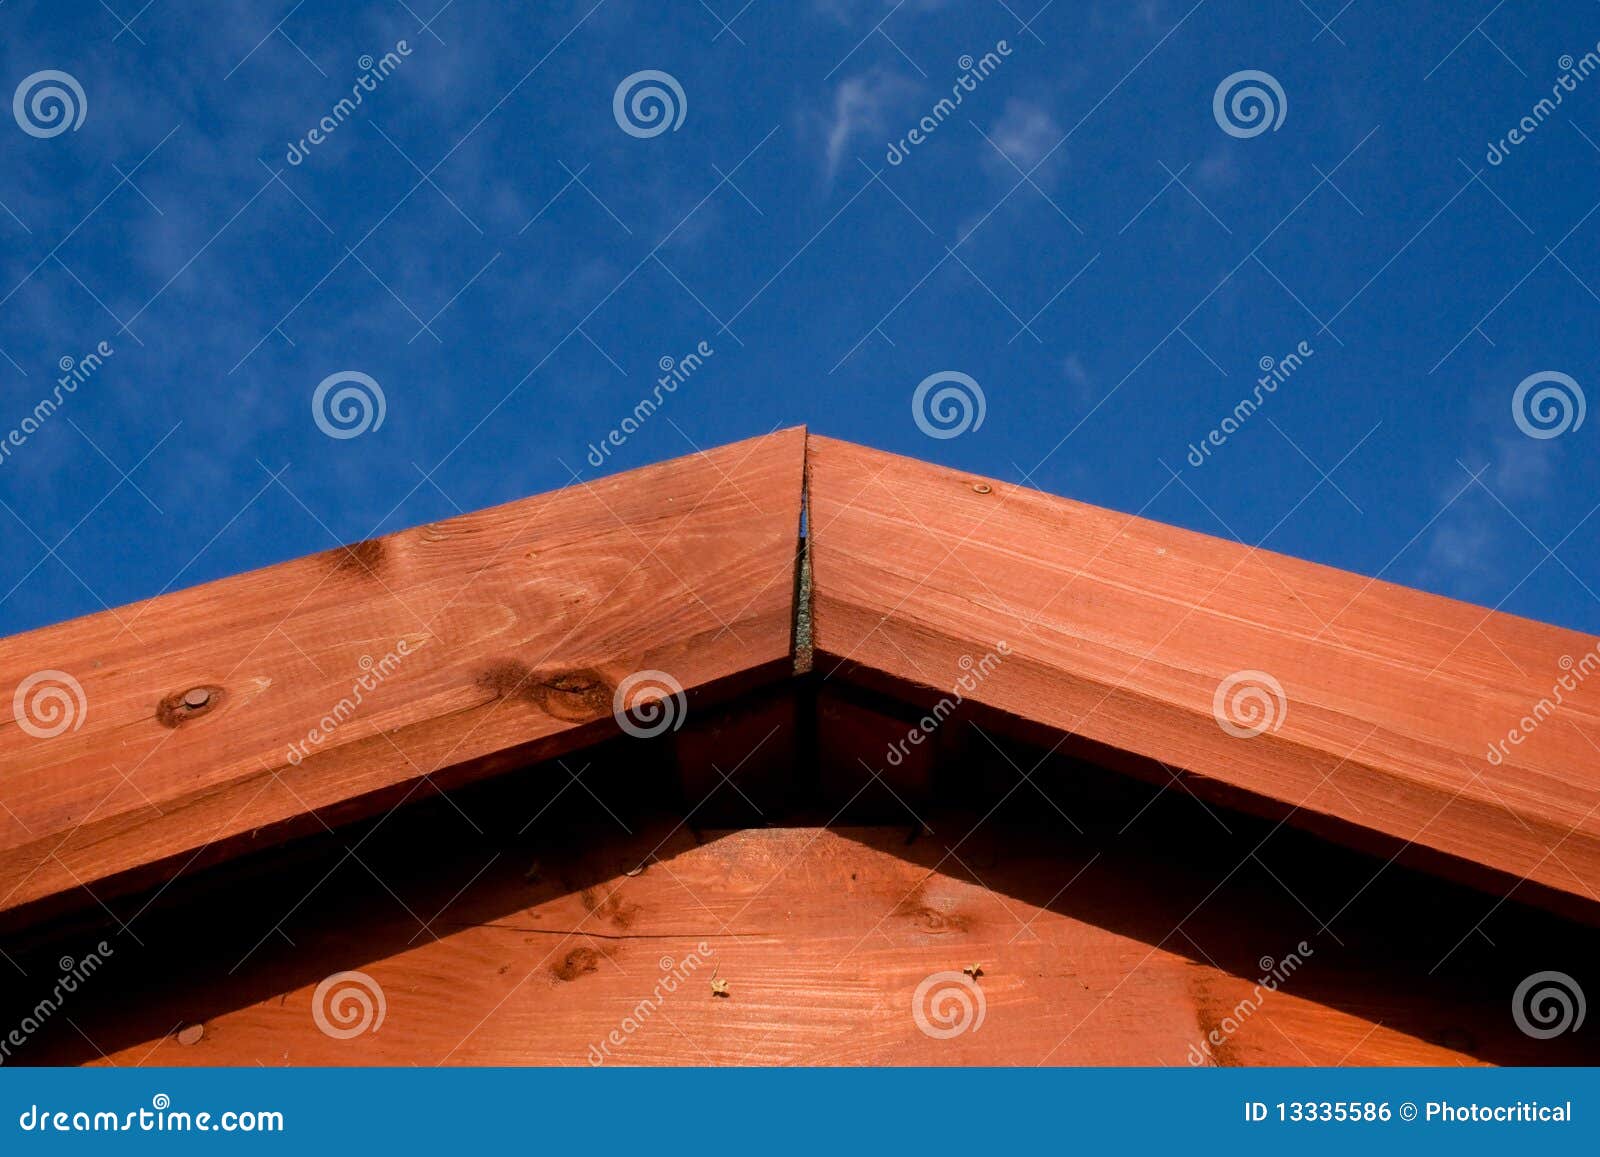 shed roof apex